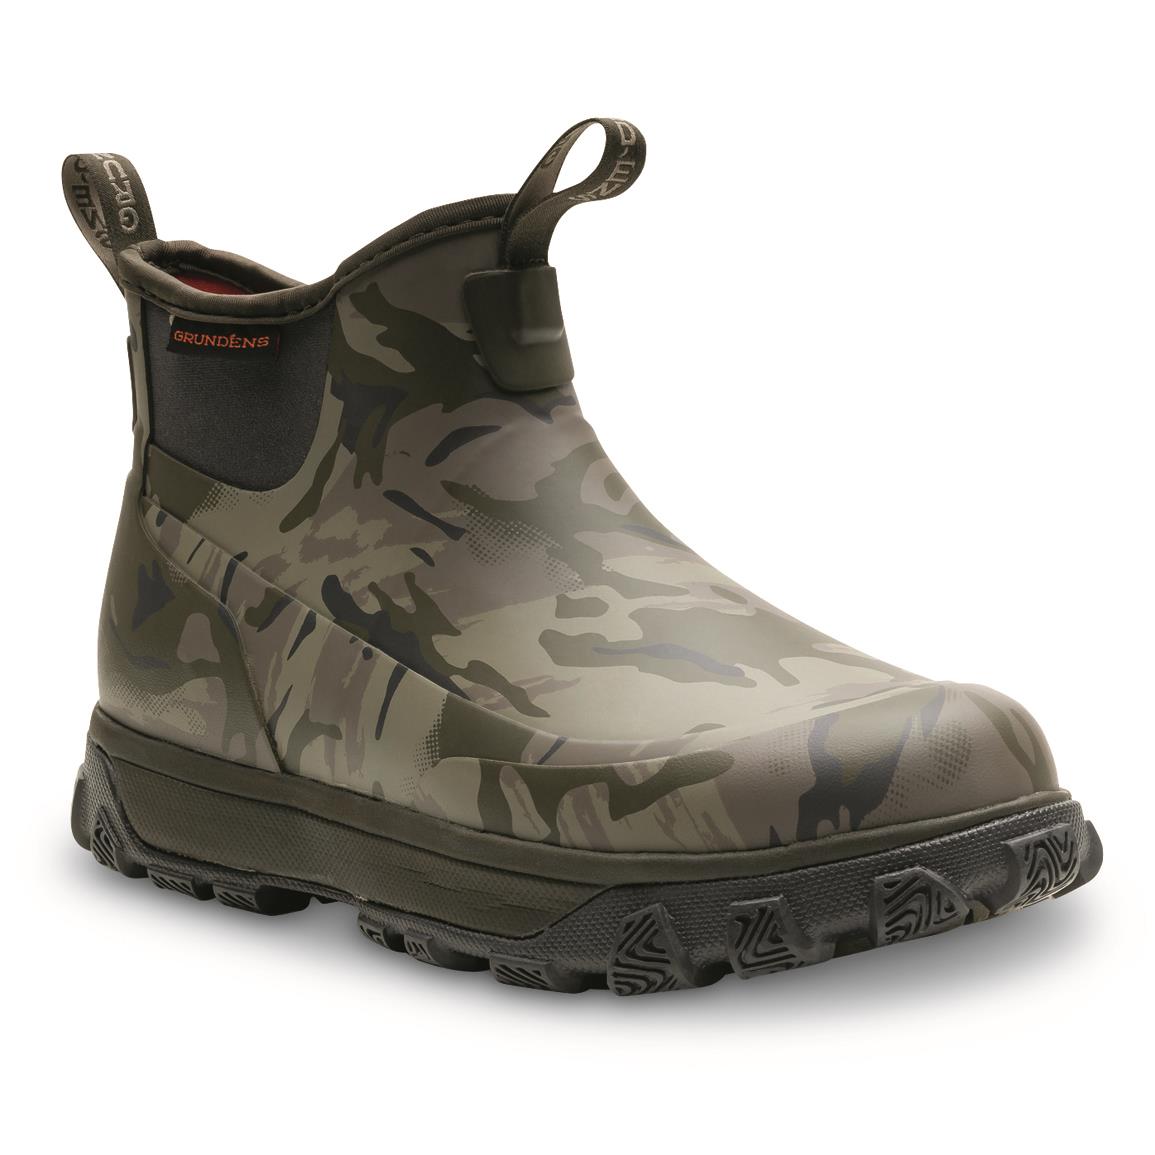 Grundens Men's Deviation Waterproof Ankle Boots, Refraction Camo Stone